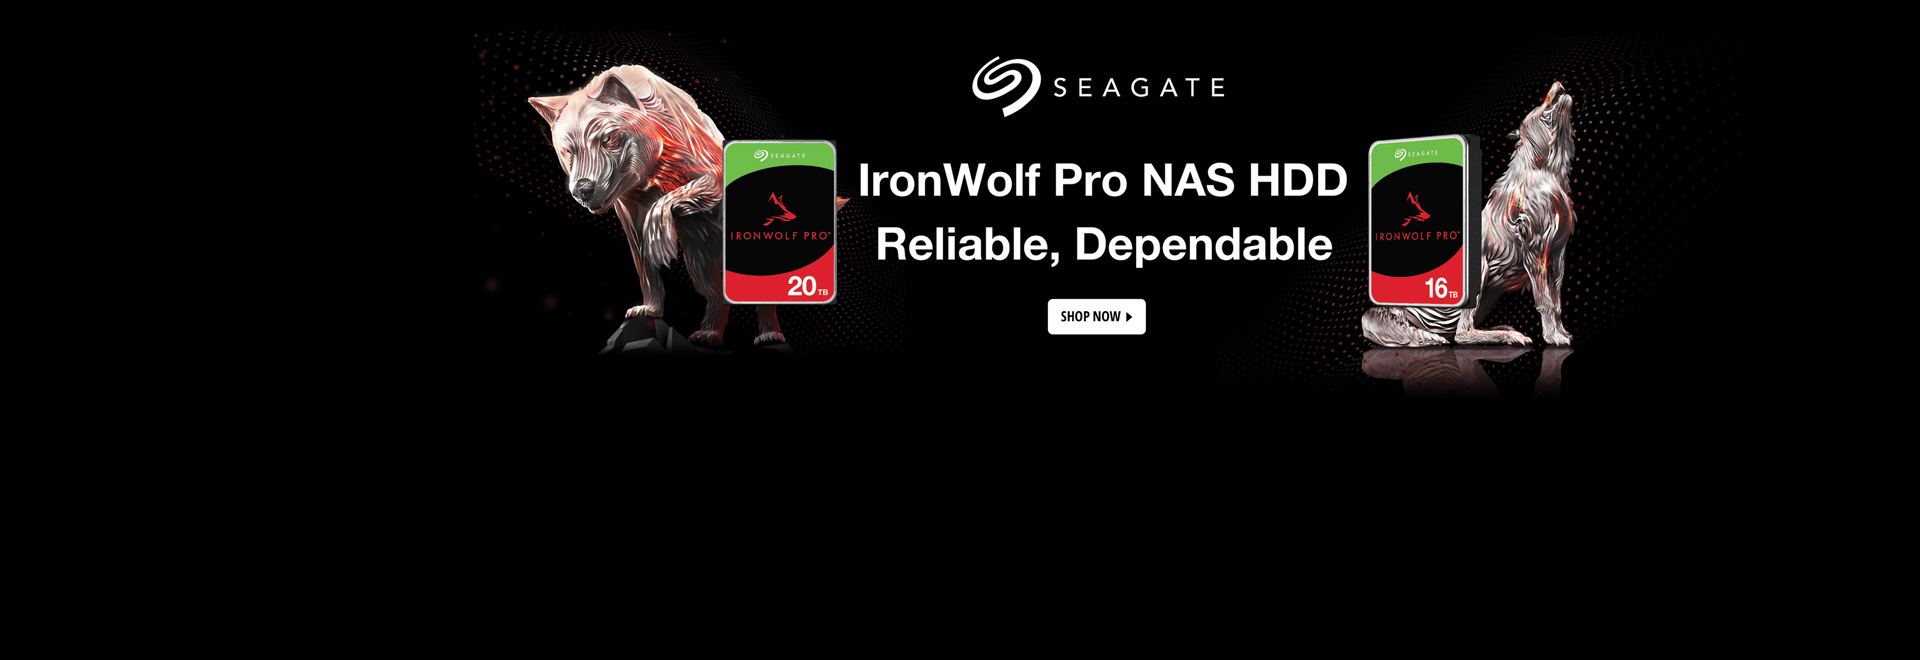 IronWolf Pro NAS HDD Reliable, Dependable